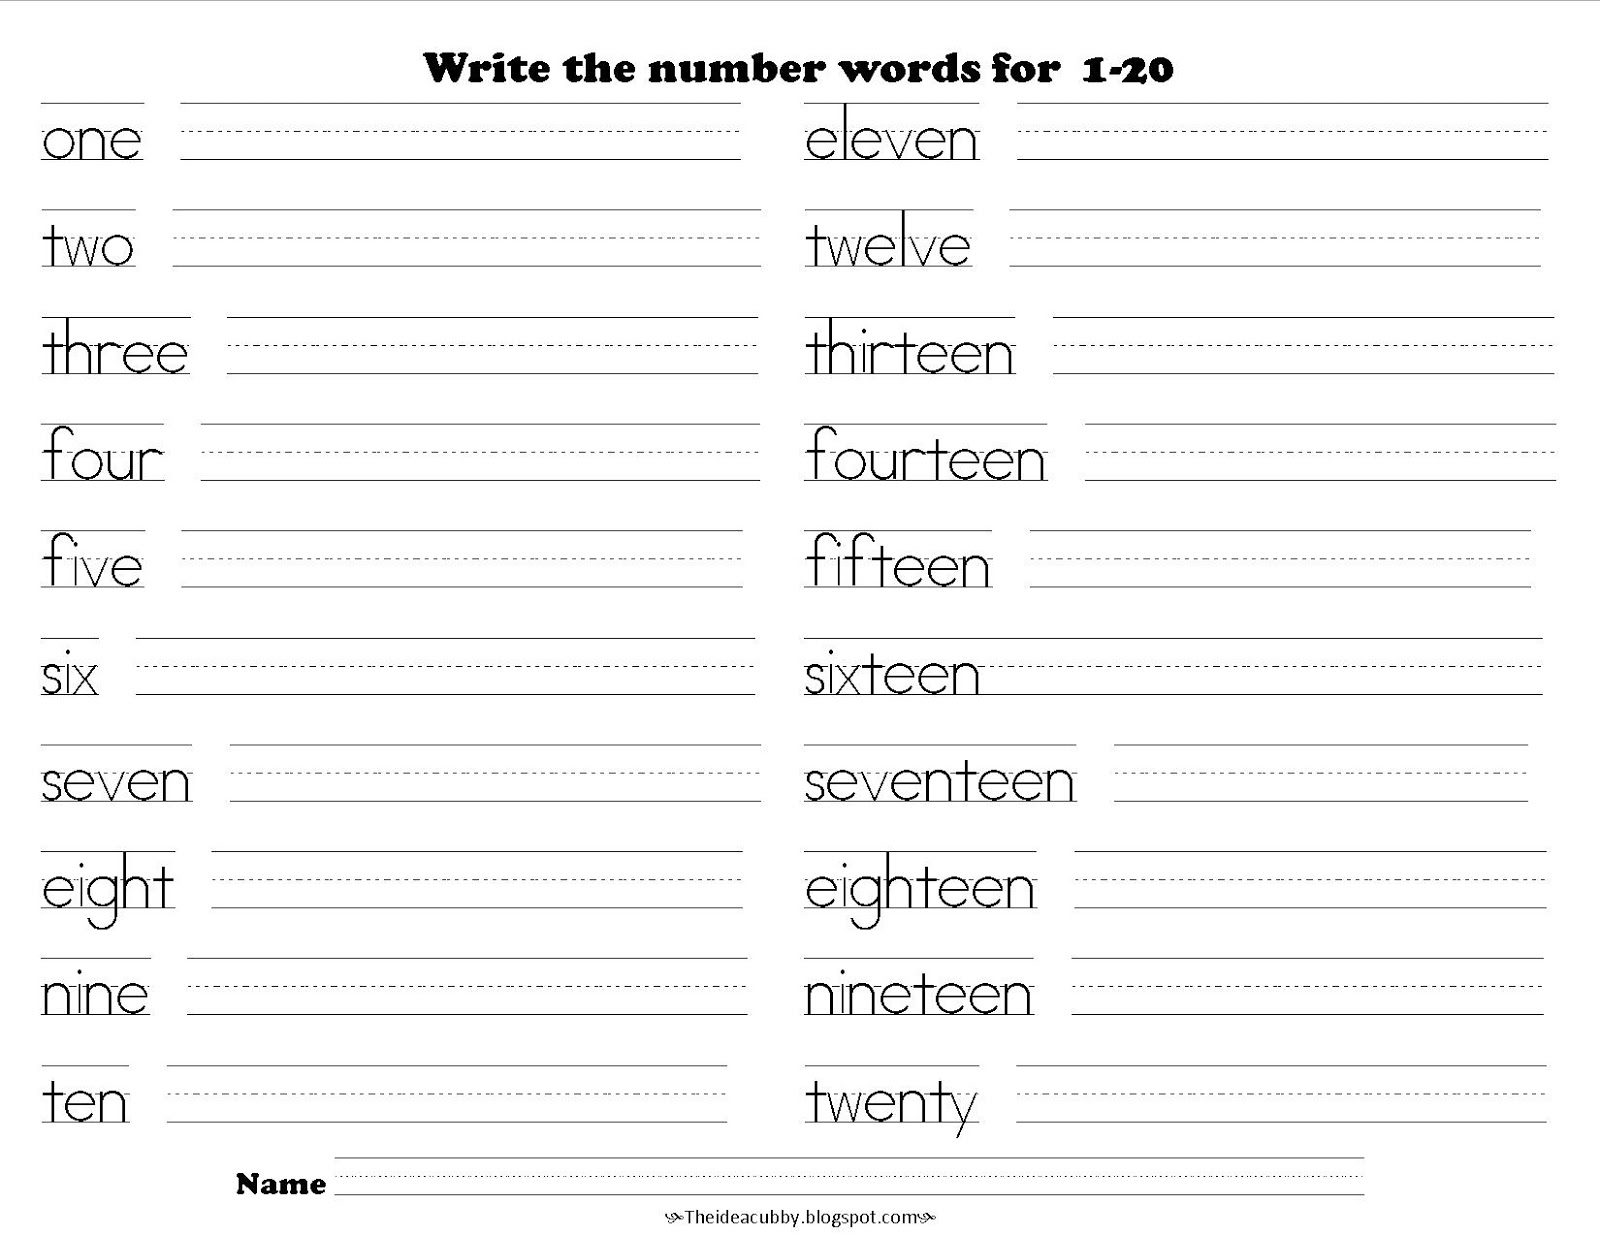 Writing numbers as words in essays